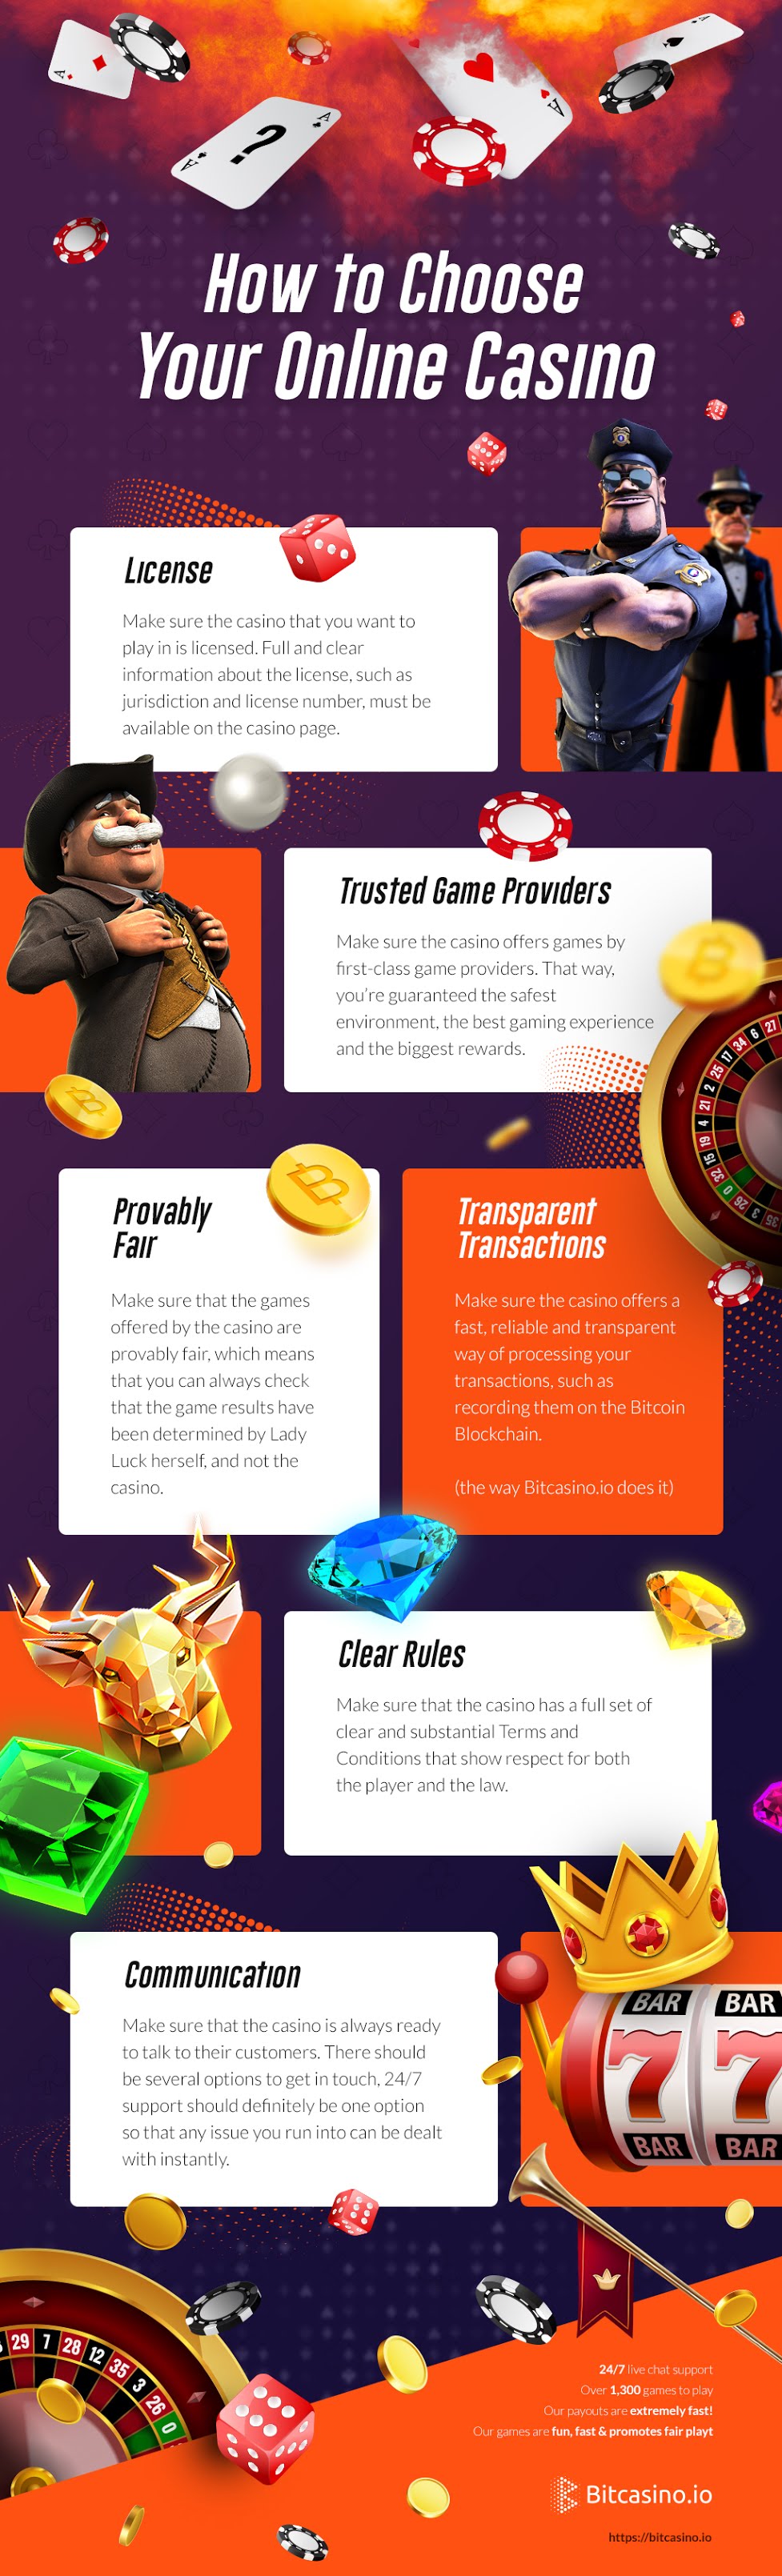 How To Choose An Online Casino #infographic